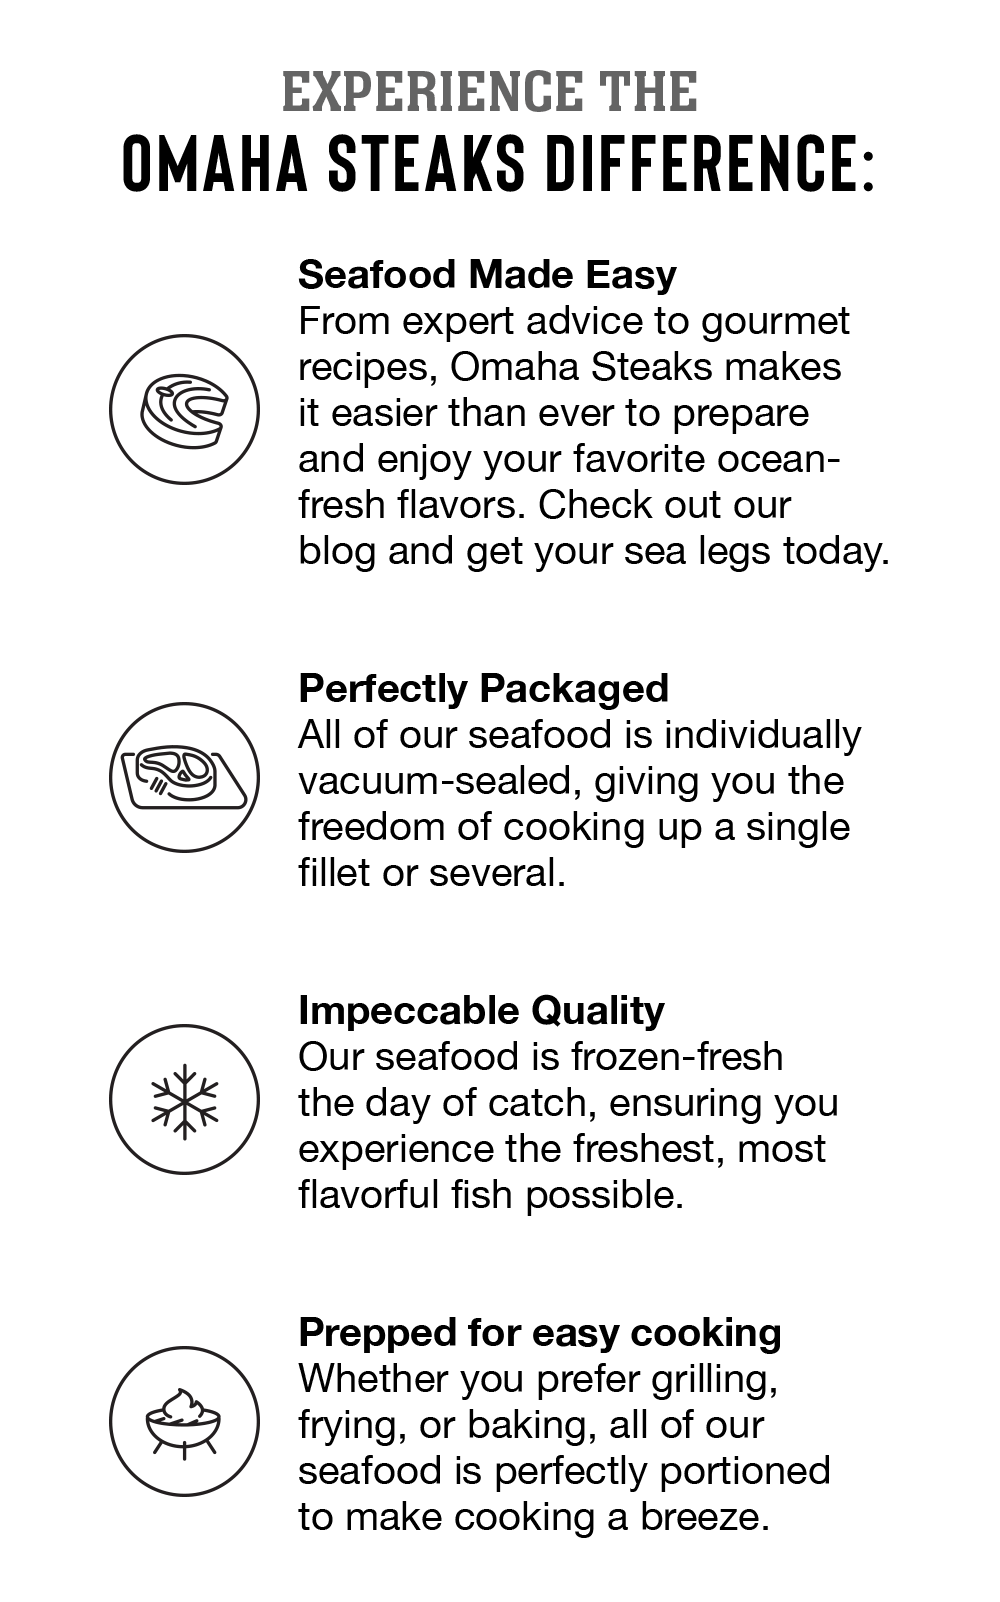 Experience the Omaha Steaks Difference: Seafood Made Easy - From expert advice to gourmet recipes, Omaha Steaks makes it easier than ever to prepare _and enjoy your favorite ocean-fresh flavors. Check out our blog and get your sea legs today. | Perfectly Packaged - All of our seafood is individually vacuum-sealed, giving you the freedom of cooking up a single fillet or several. | Impeccable Quality - Our seafood is frozen-fresh the day of catch, ensuring you experience the freshest, most flavorful fish possible. | Prepped for easy cooking - Whether you prefer grilling, frying, or baking, all of our seafood is perfectly portioned to make cooking a breeze.